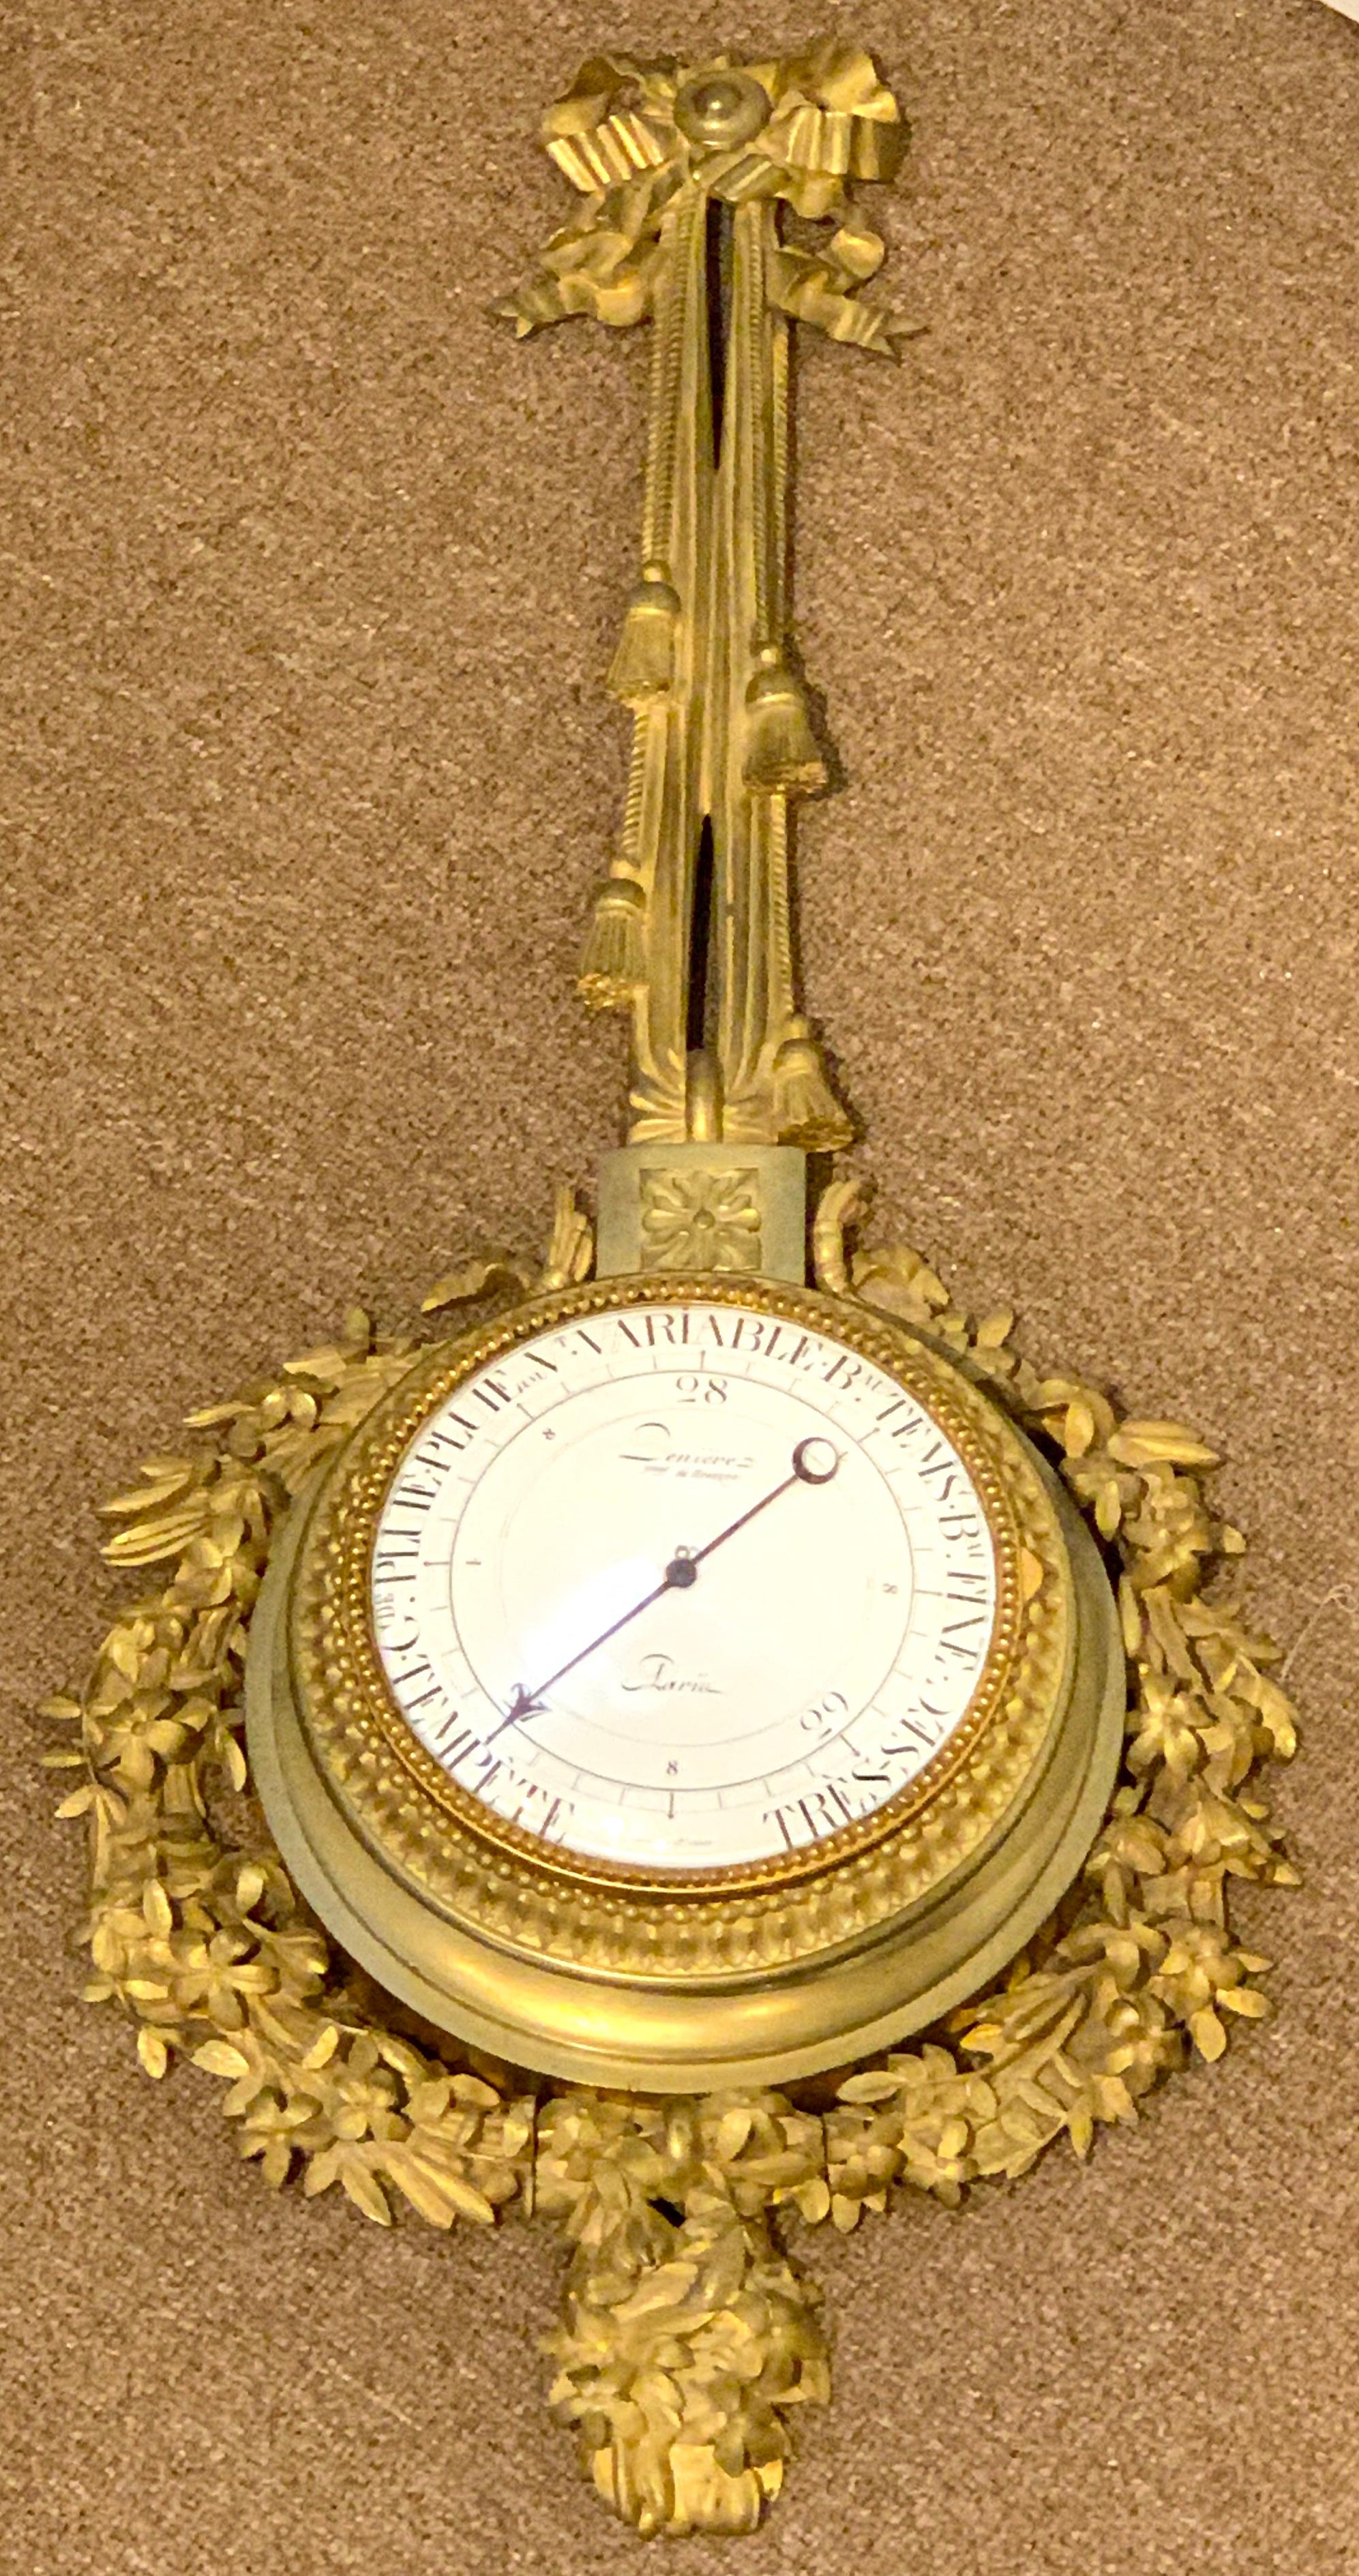 The finest Louis XVI style gilt bronze barometer, by Deniere, Paris, circa 1880
Jean-Francois & Guillaume Deniere Fl, 1820-1901
Exquisite detailed casting with tassels and foliate wreath, substantial in size 35 inches high x 14 inches wide, 8 inch